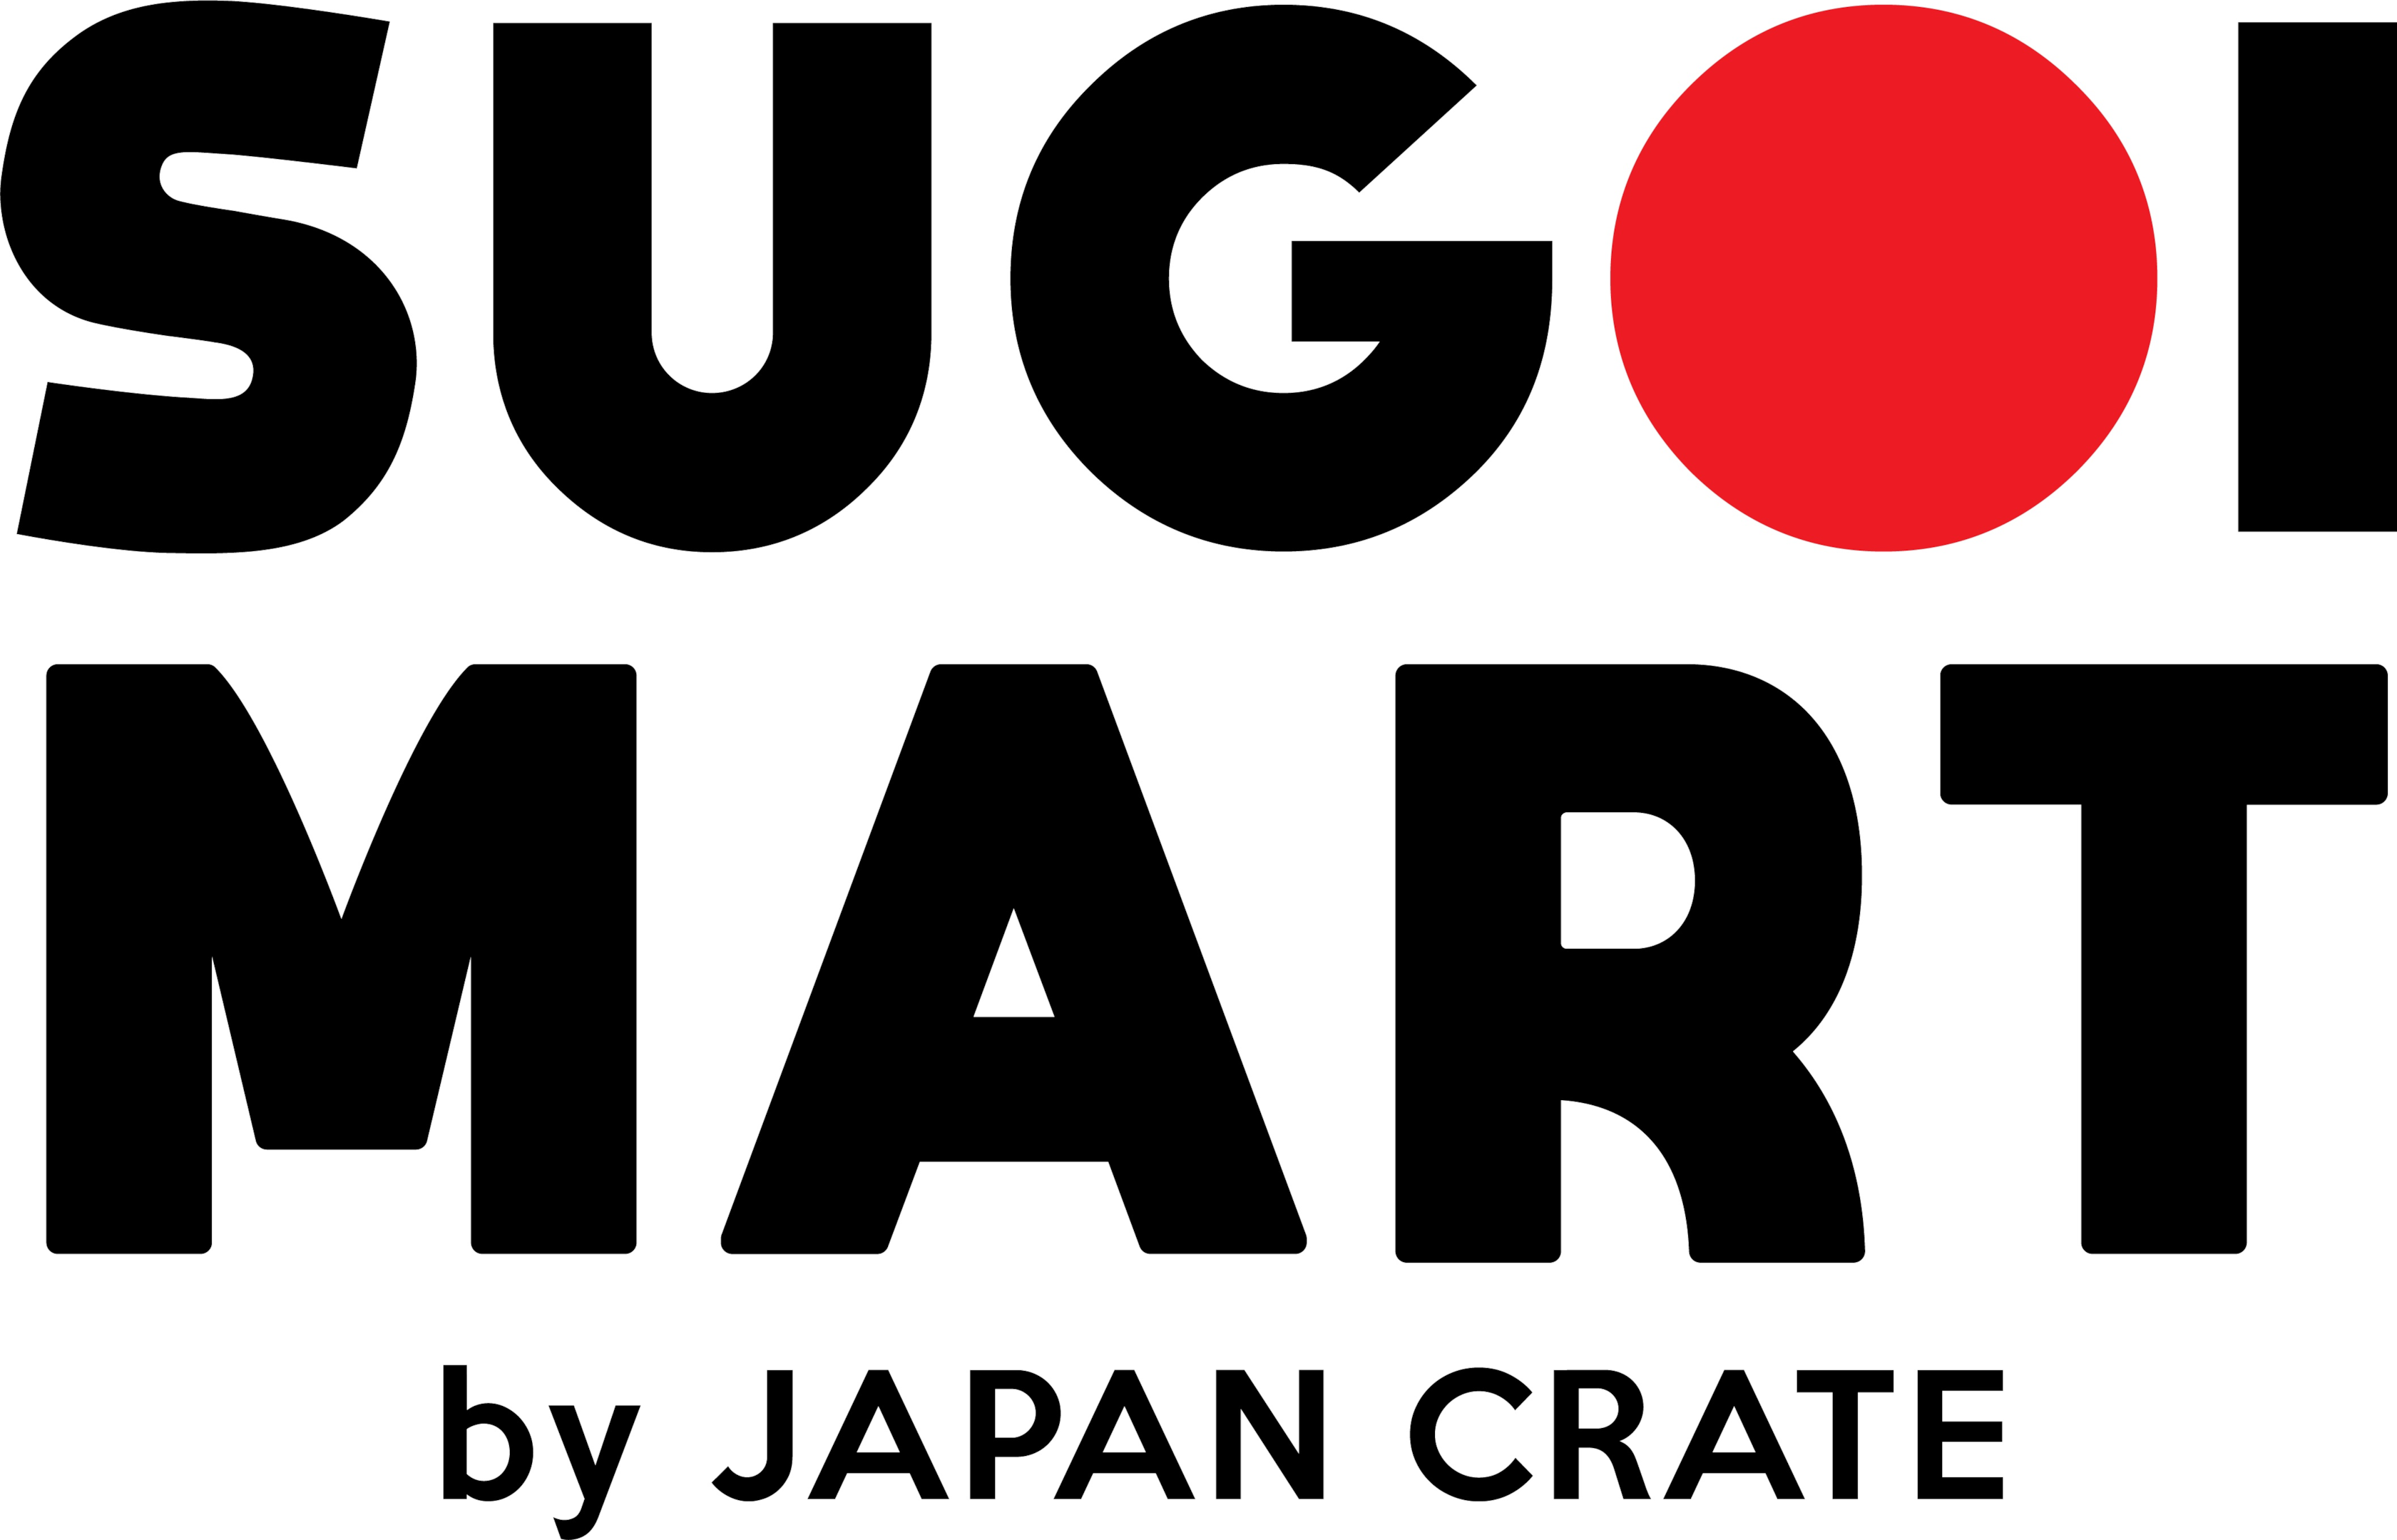 Sugoi Mart by Japan Crate